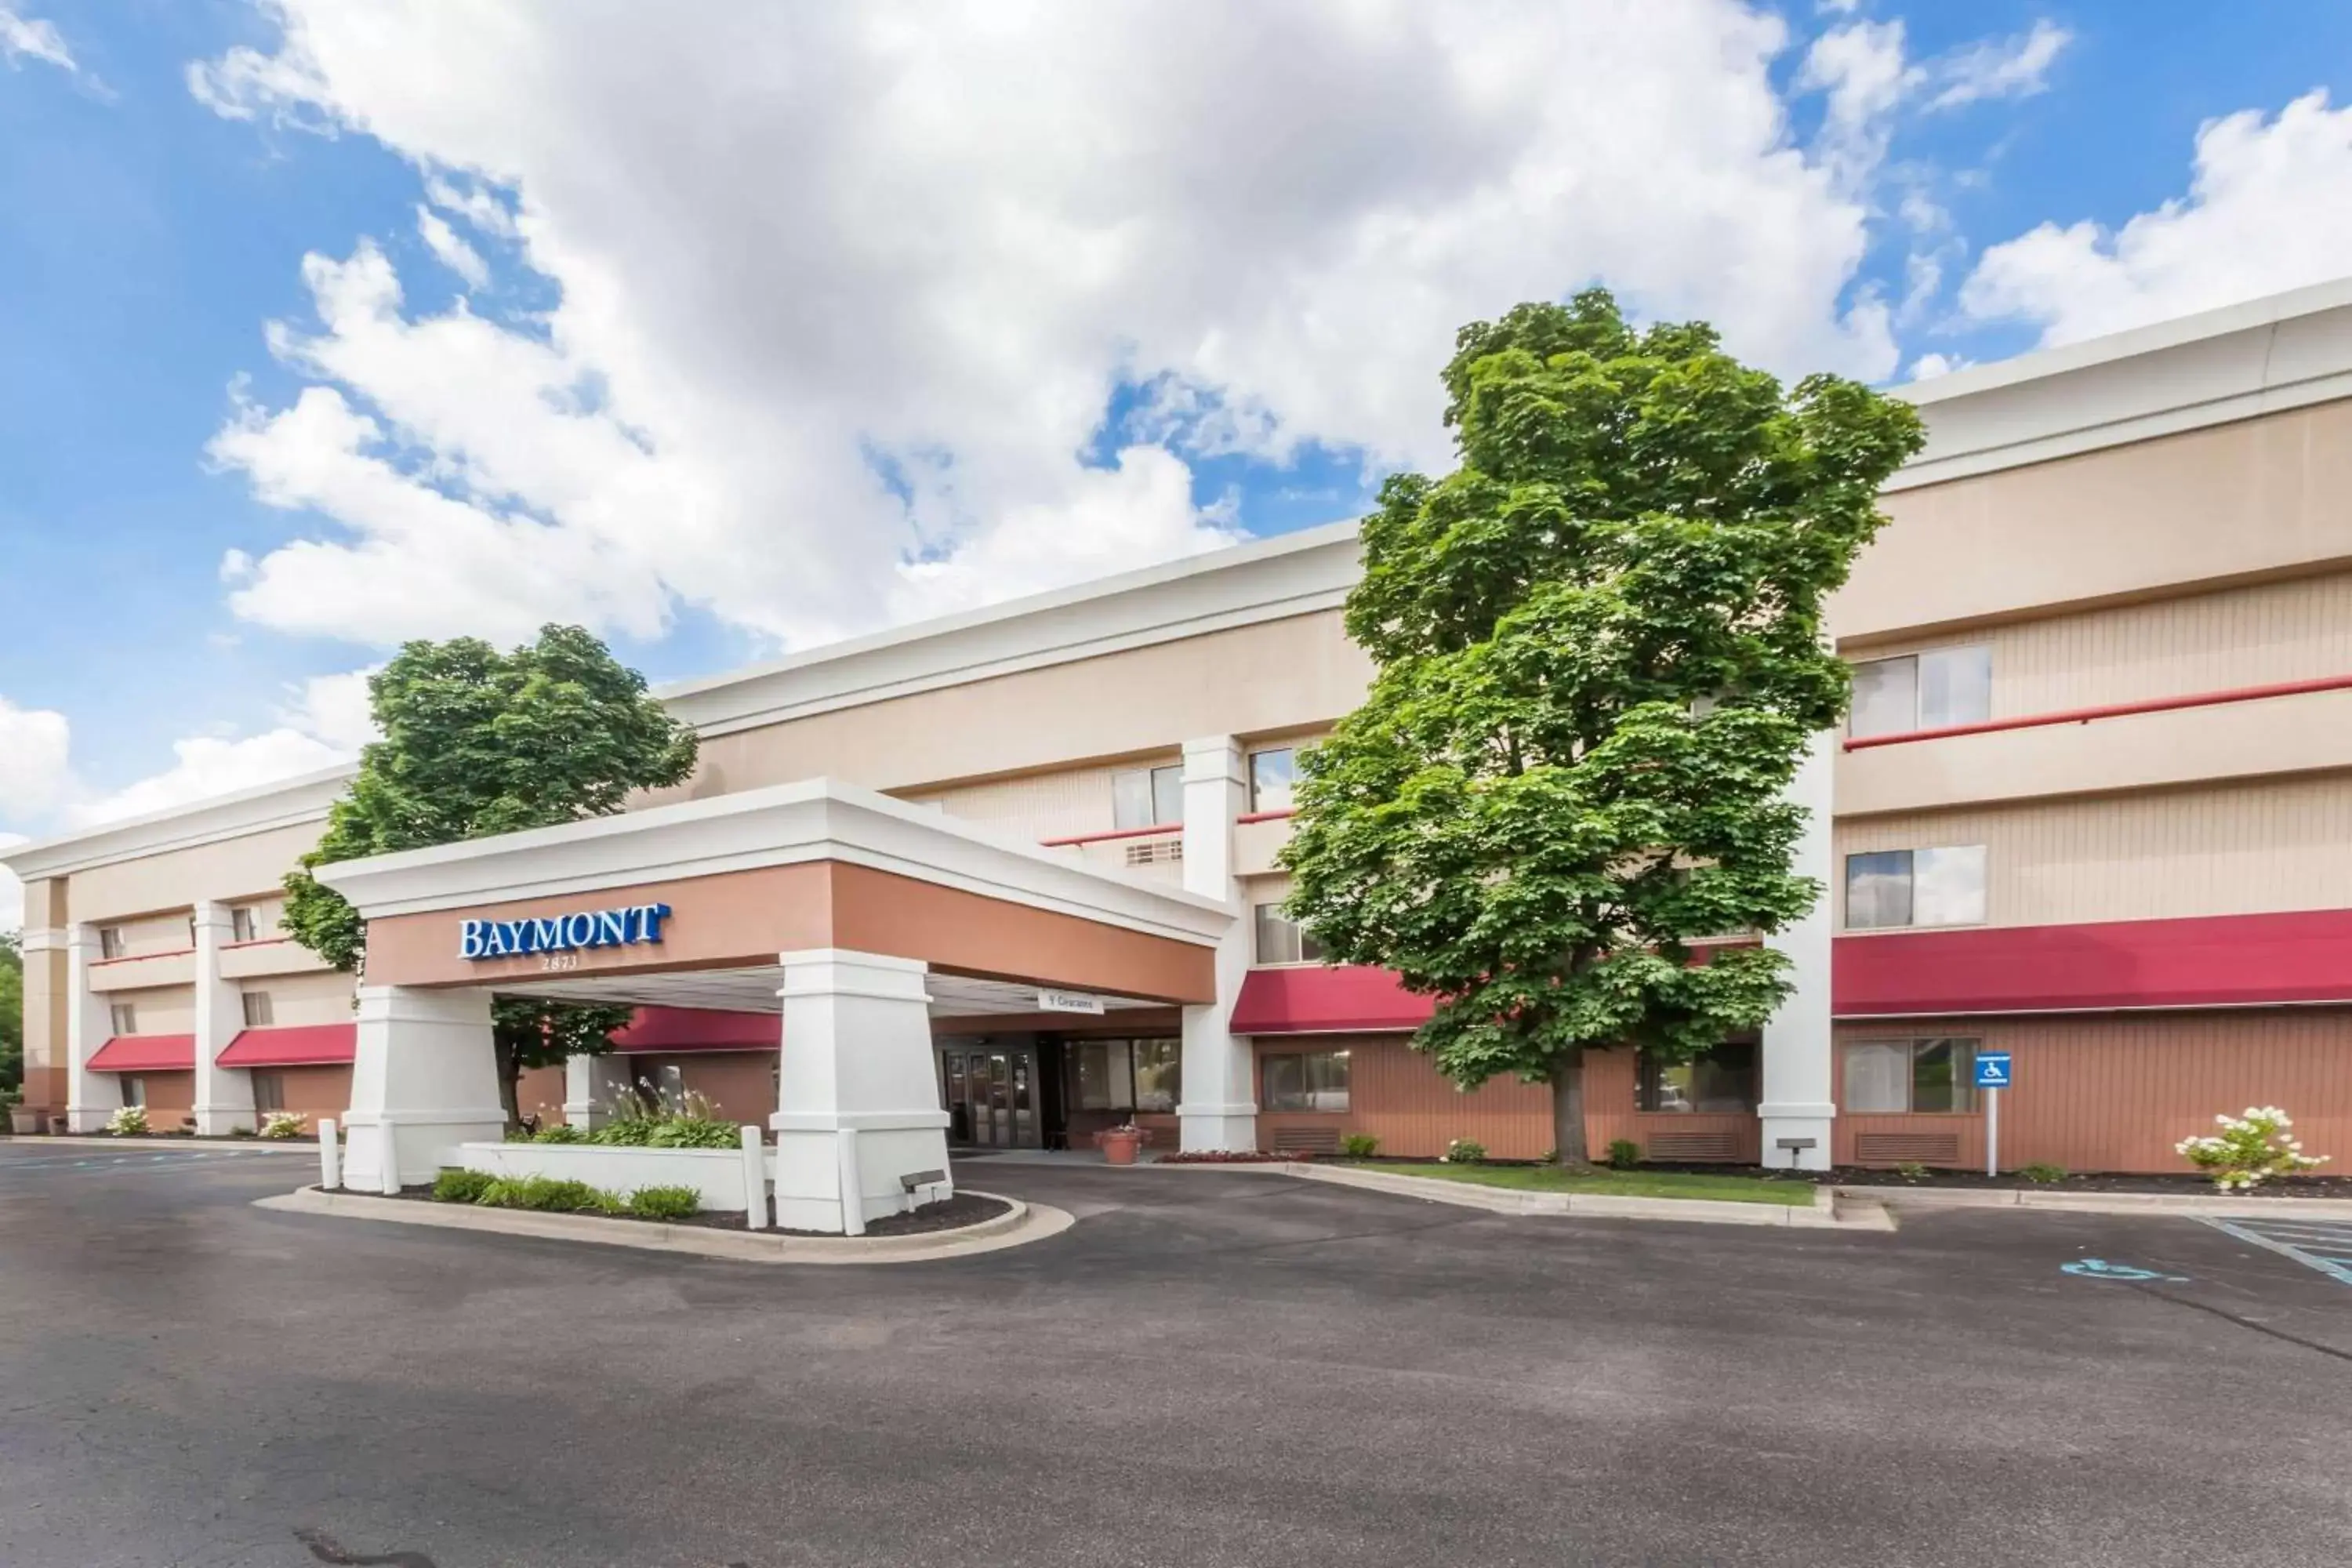 Property building in Baymont by Wyndham Grand Rapids Airport